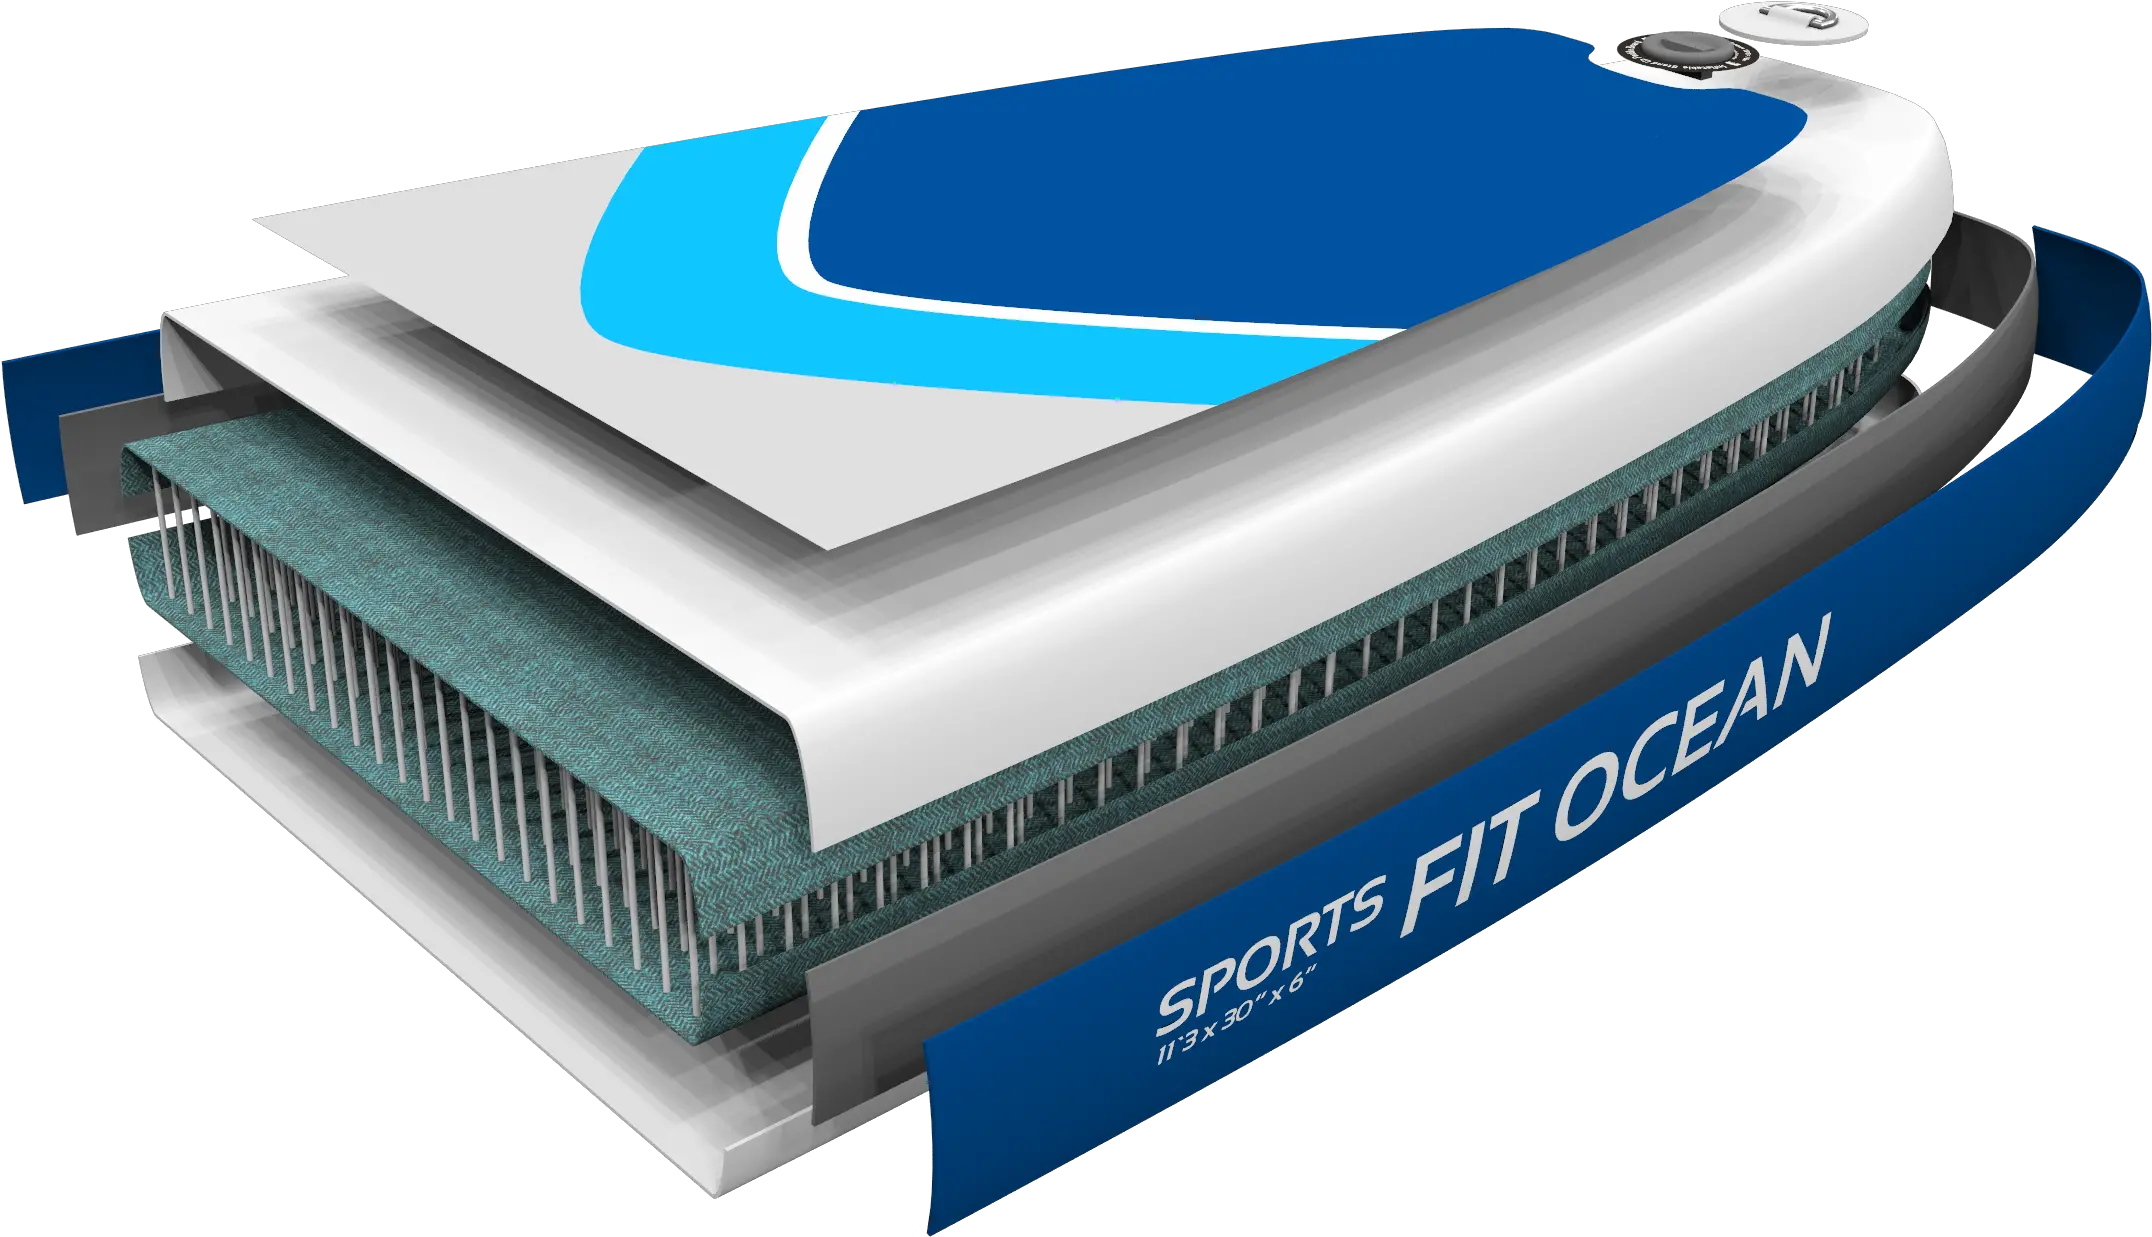 2019 Fit Ocean Sports 11u00273u2033 Up To 110kgsports Suppama Hard Png Wii Sports Logo